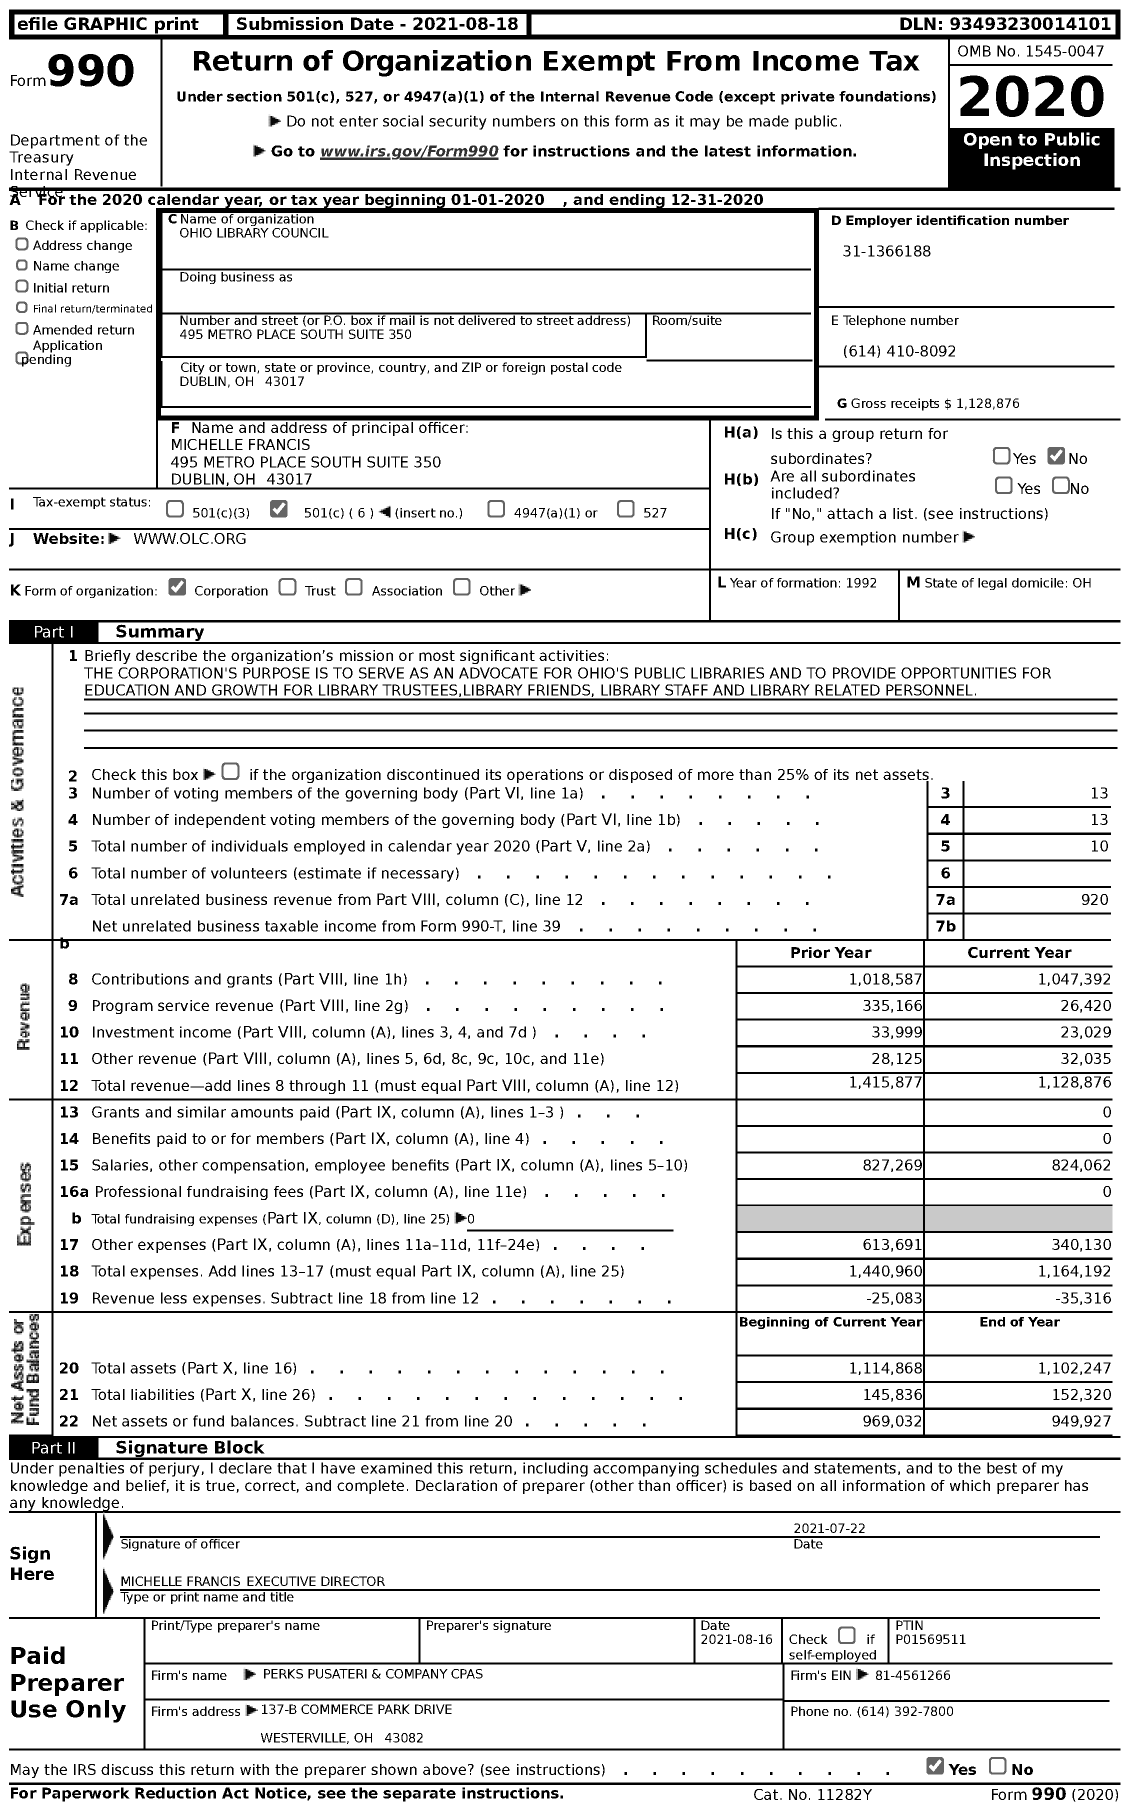 Image of first page of 2020 Form 990 for Ohio Library Council (OLC)